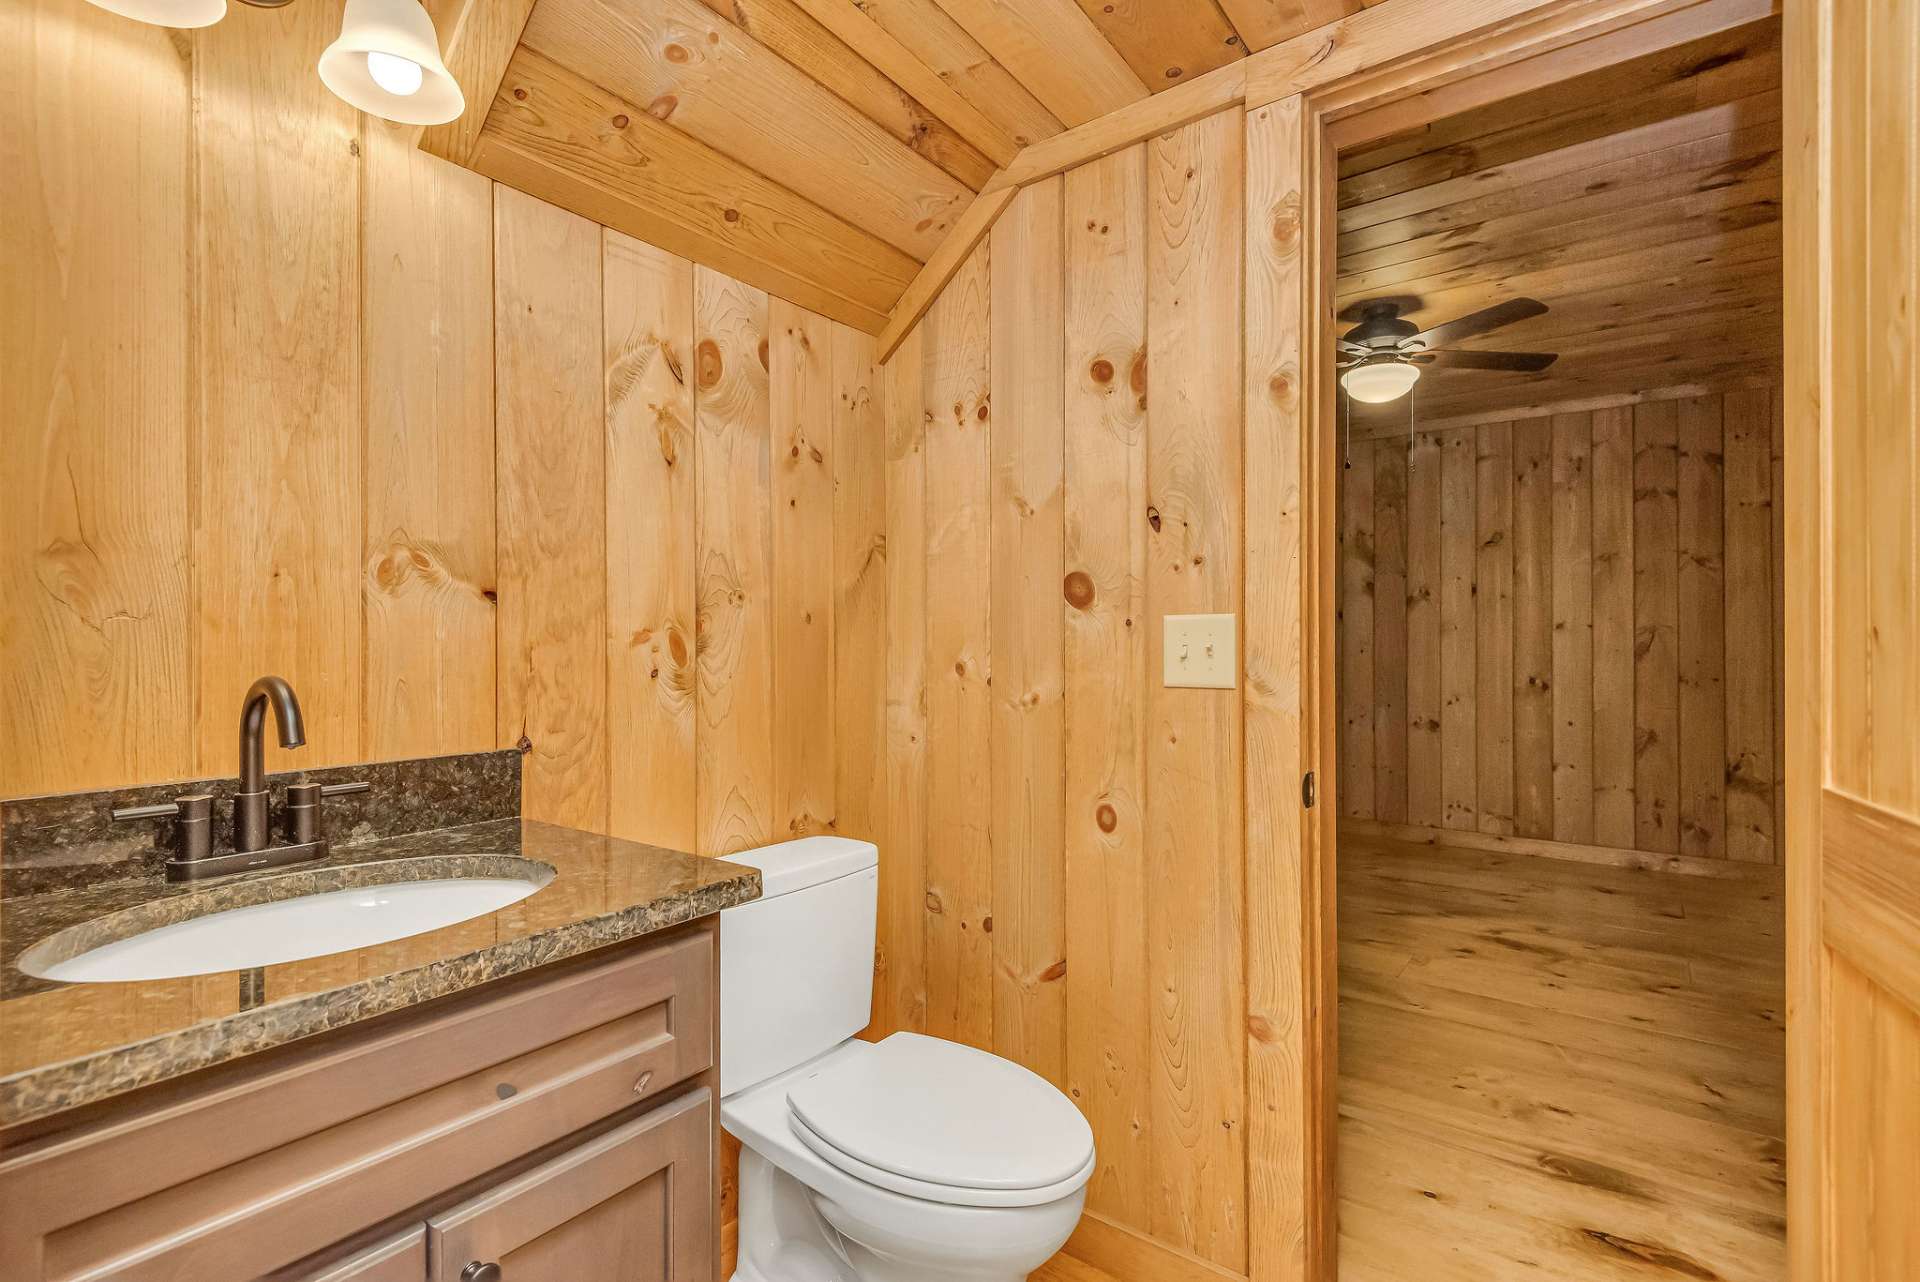 A full bath is conveniently located between the family room and bedroom.